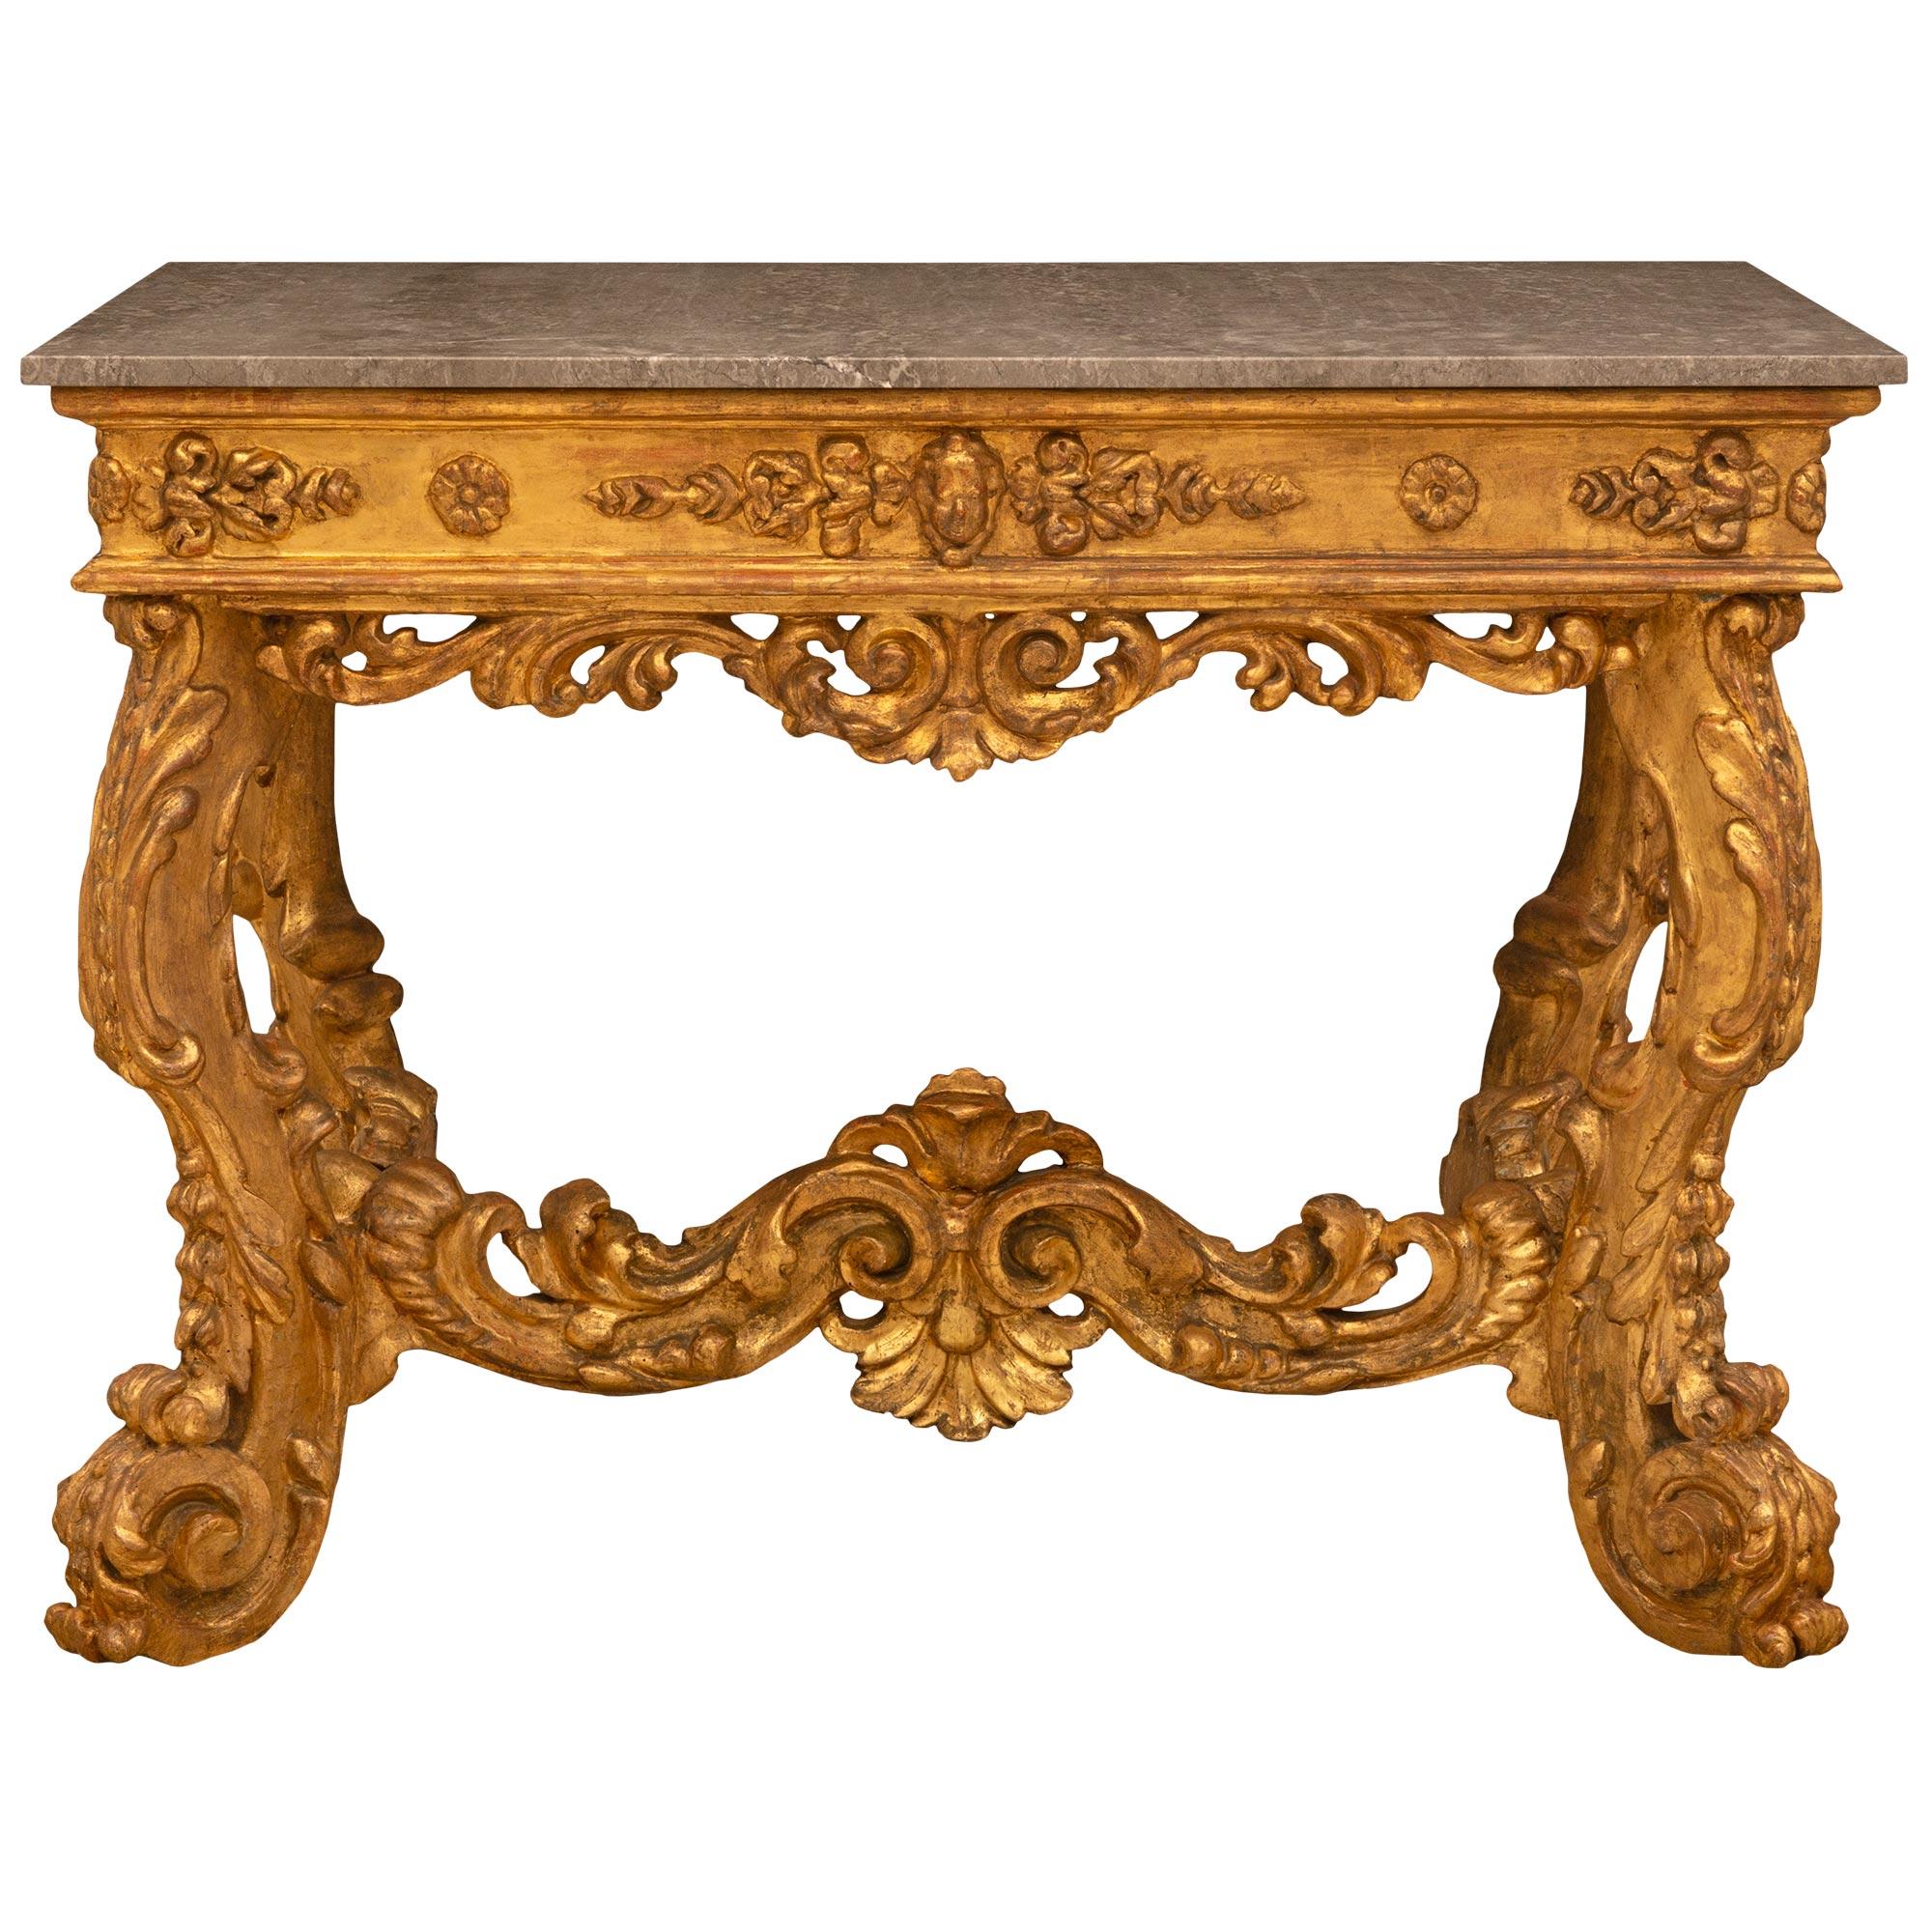 Italian Early 18th Century Louis XIV Period Gilt Wood Console For Sale 4